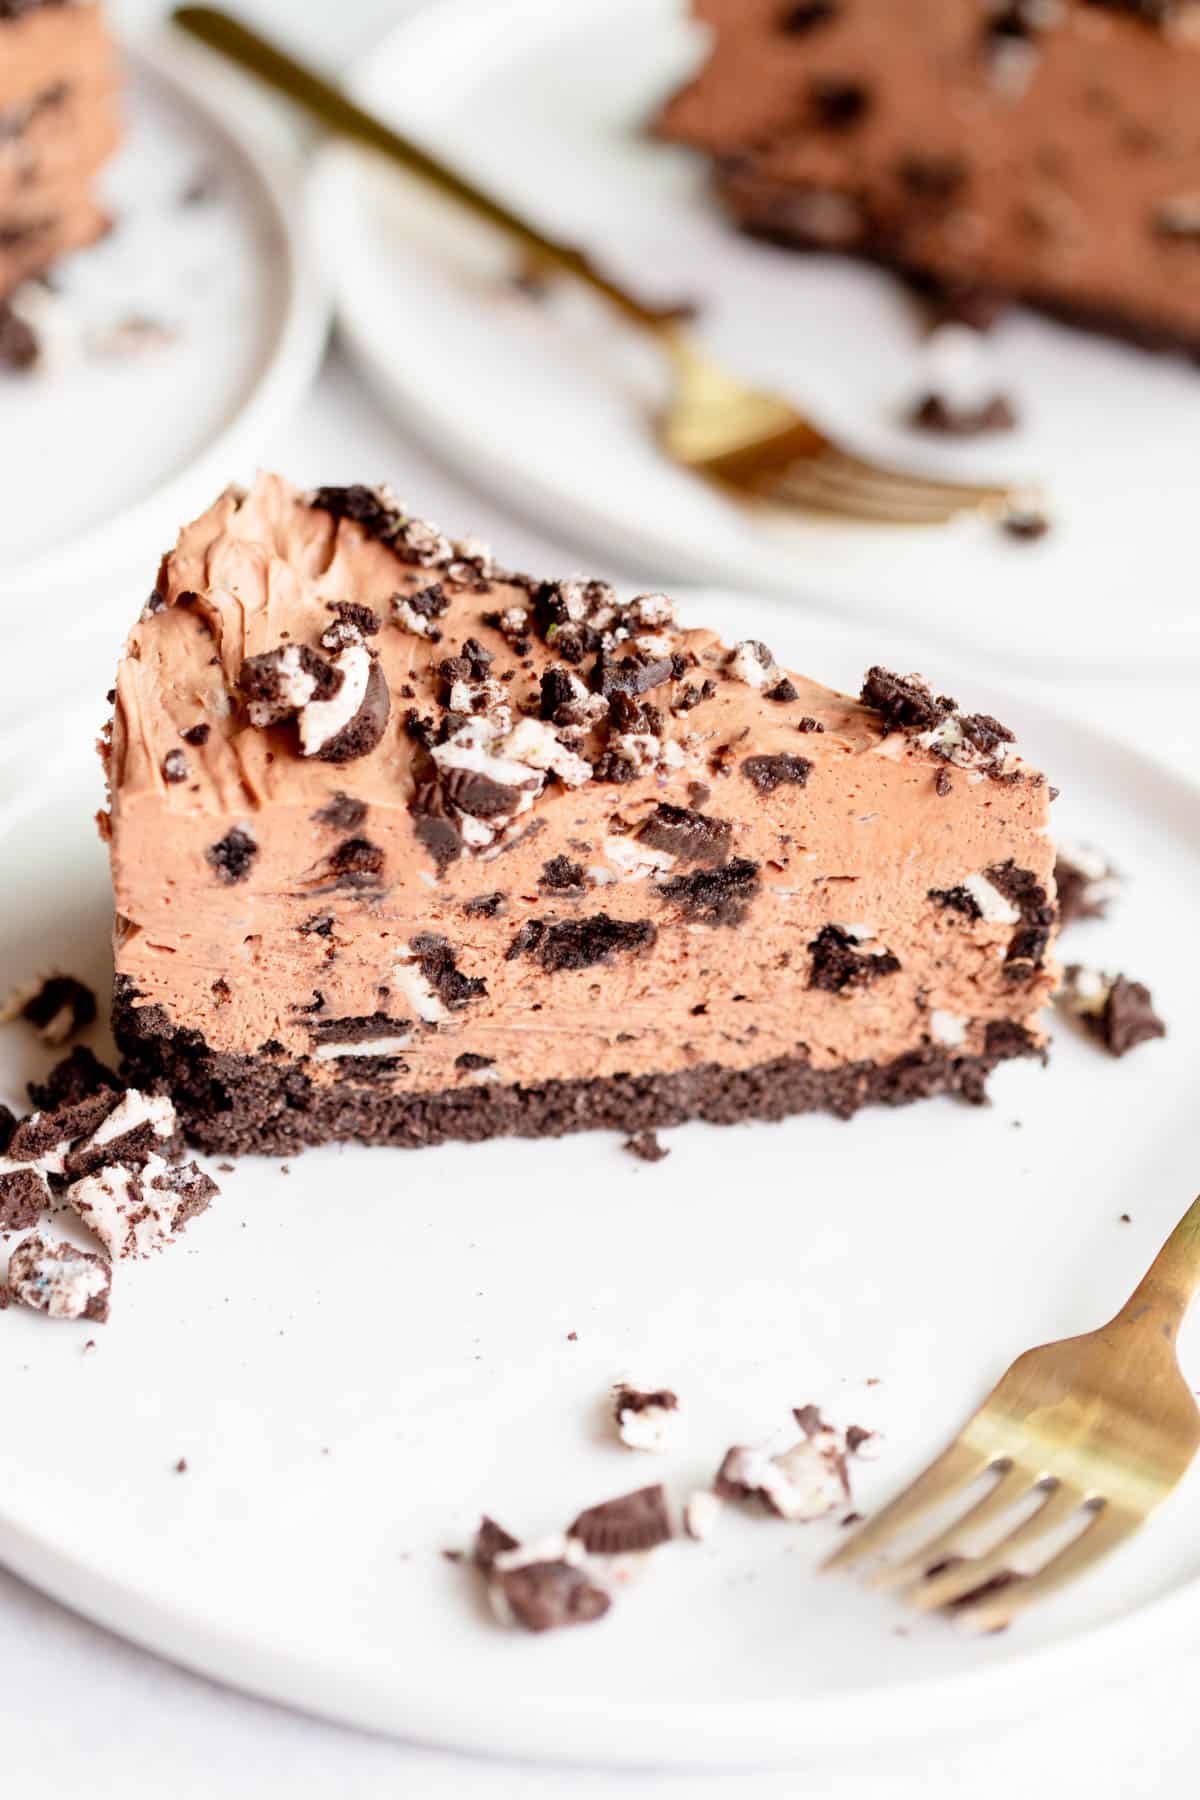 A slice of no Bake Oreo Cheesecake on a white plate, topped with chopped Oreos and more chopped Oreos scattered on the plate. In the background there is another slice of No Bake Oreo Cheesecake with a gold fork next to it.